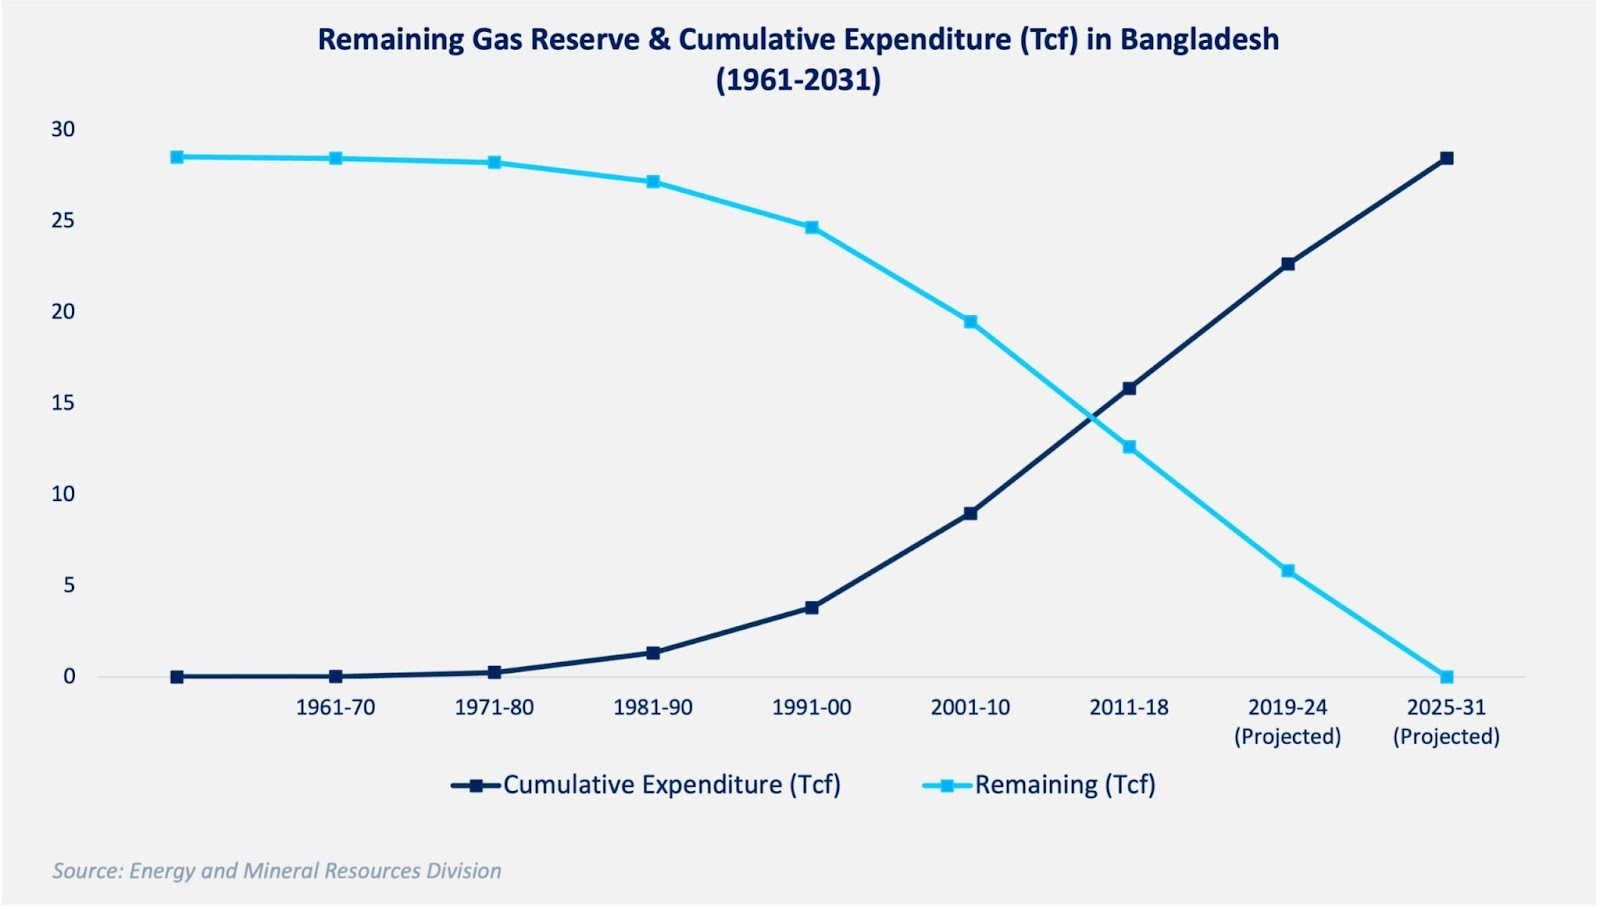 Remaining Gas Reserves & Cumulative Expenditures in Bangladesh, Source: LightCastle Partners